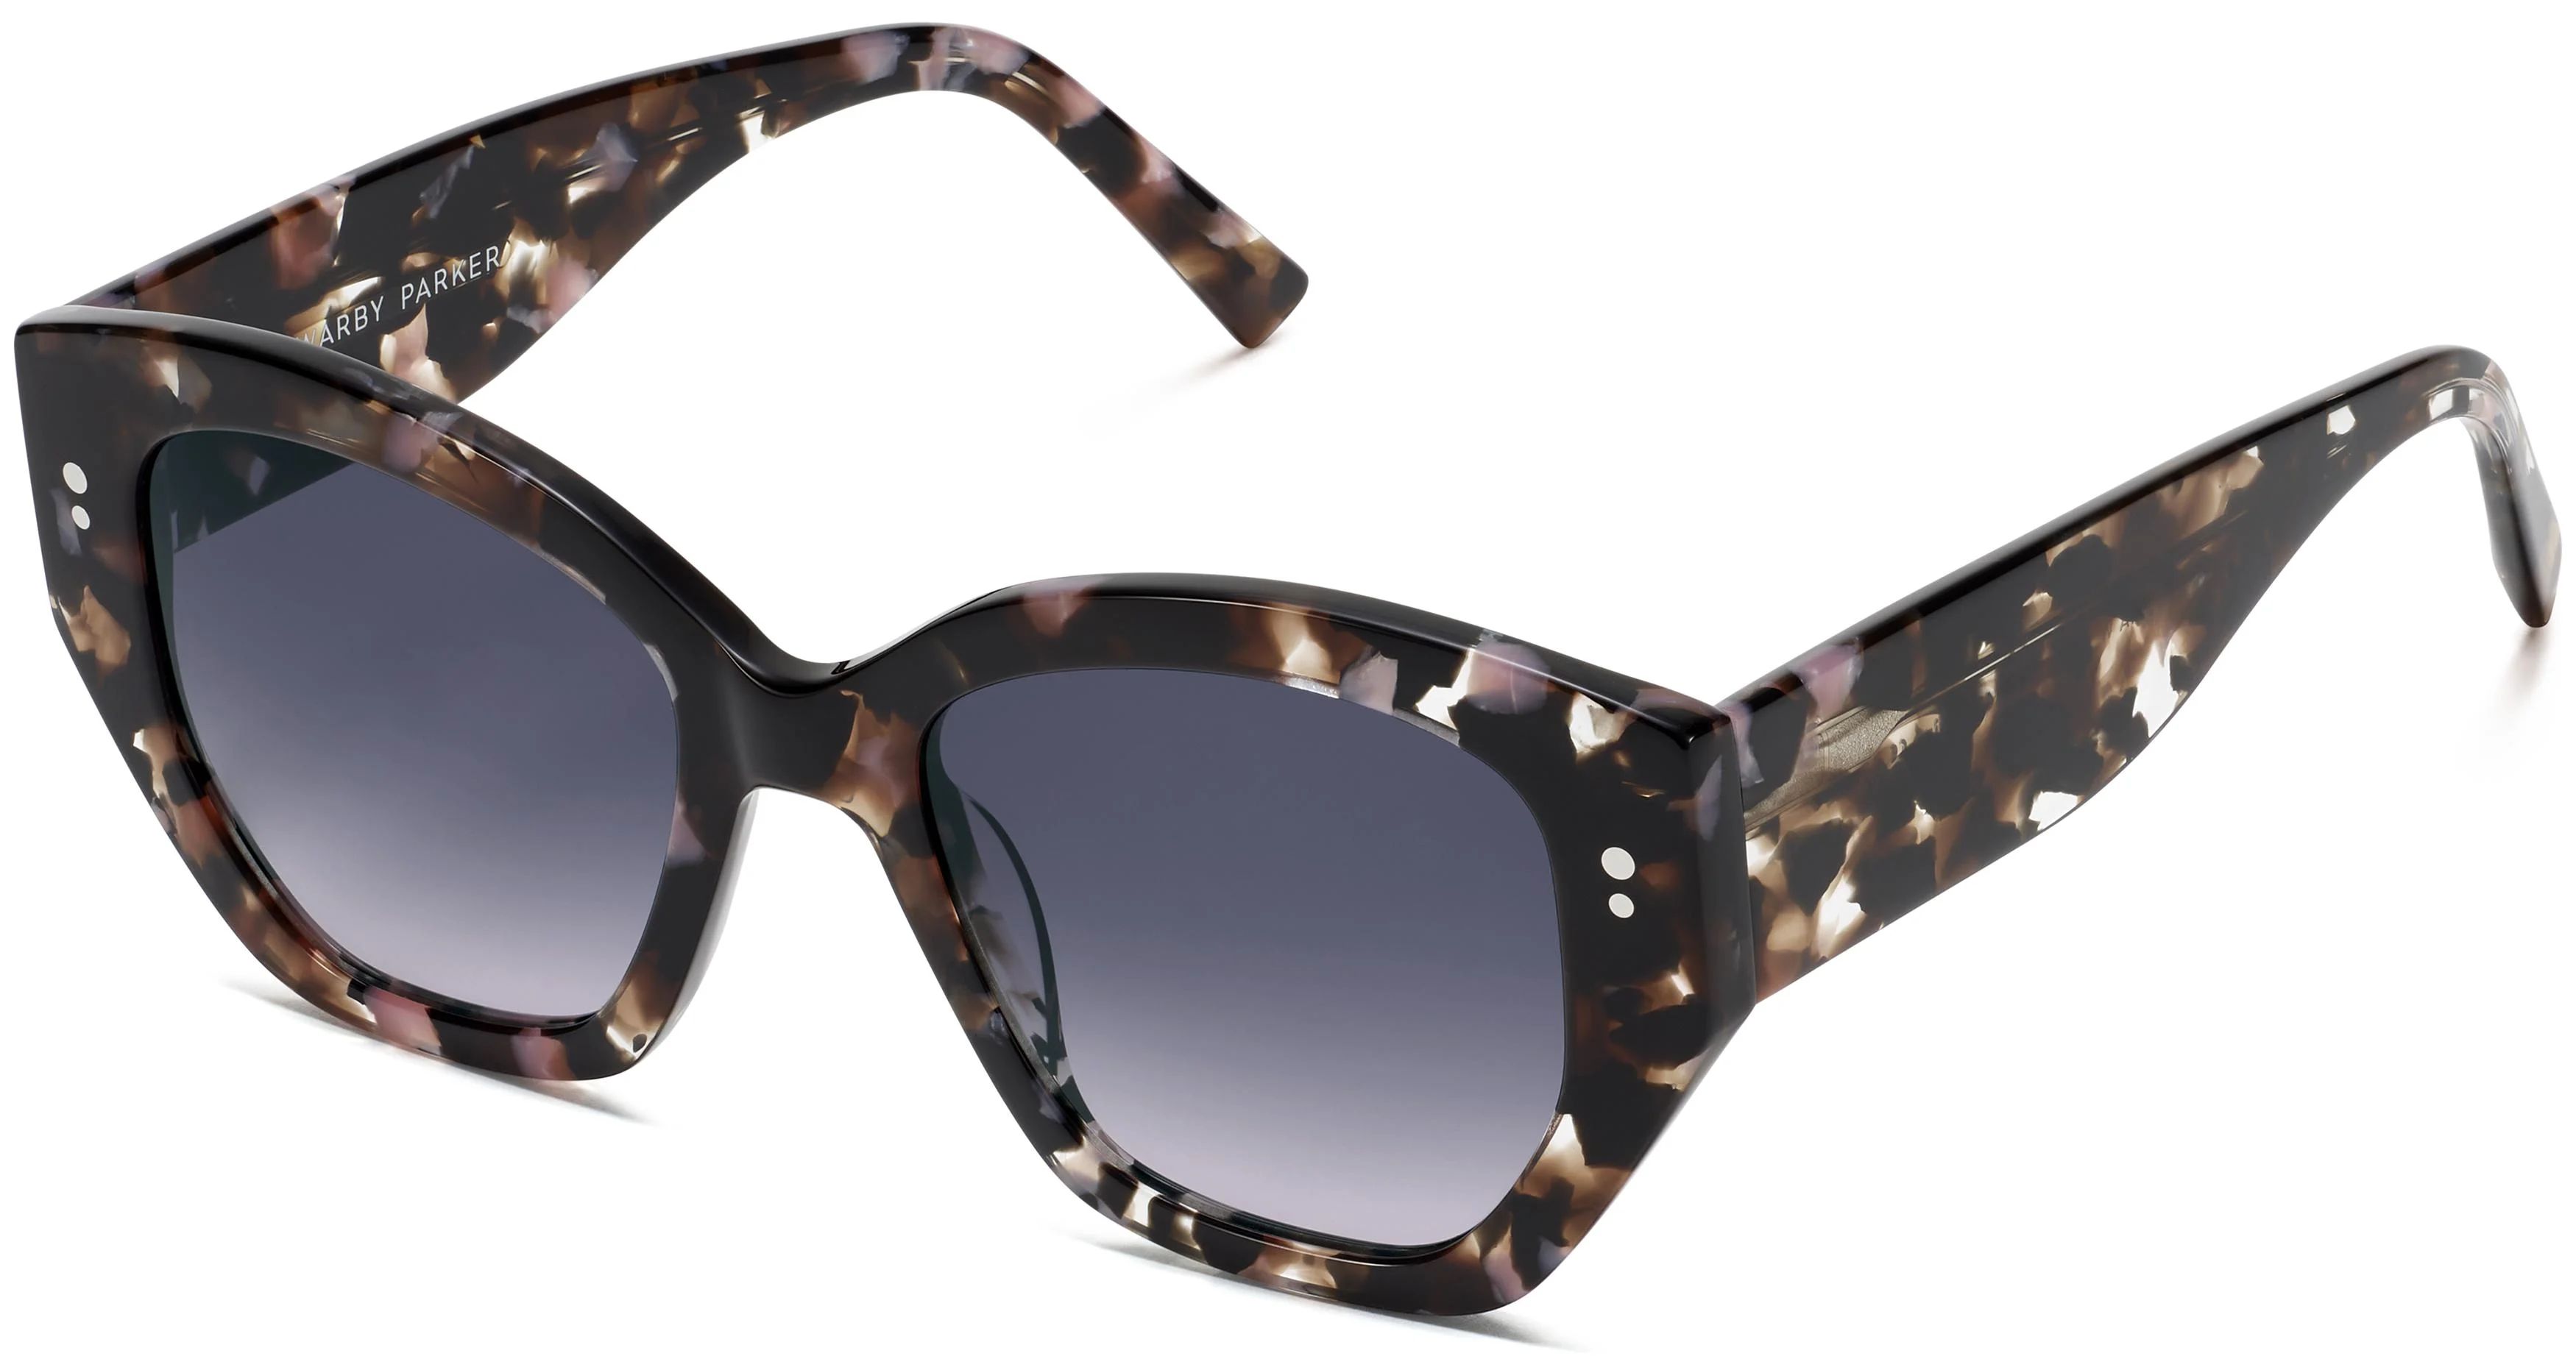 Masha Sunglasses in Black Currant Tortoise | Warby Parker | Warby Parker (US)